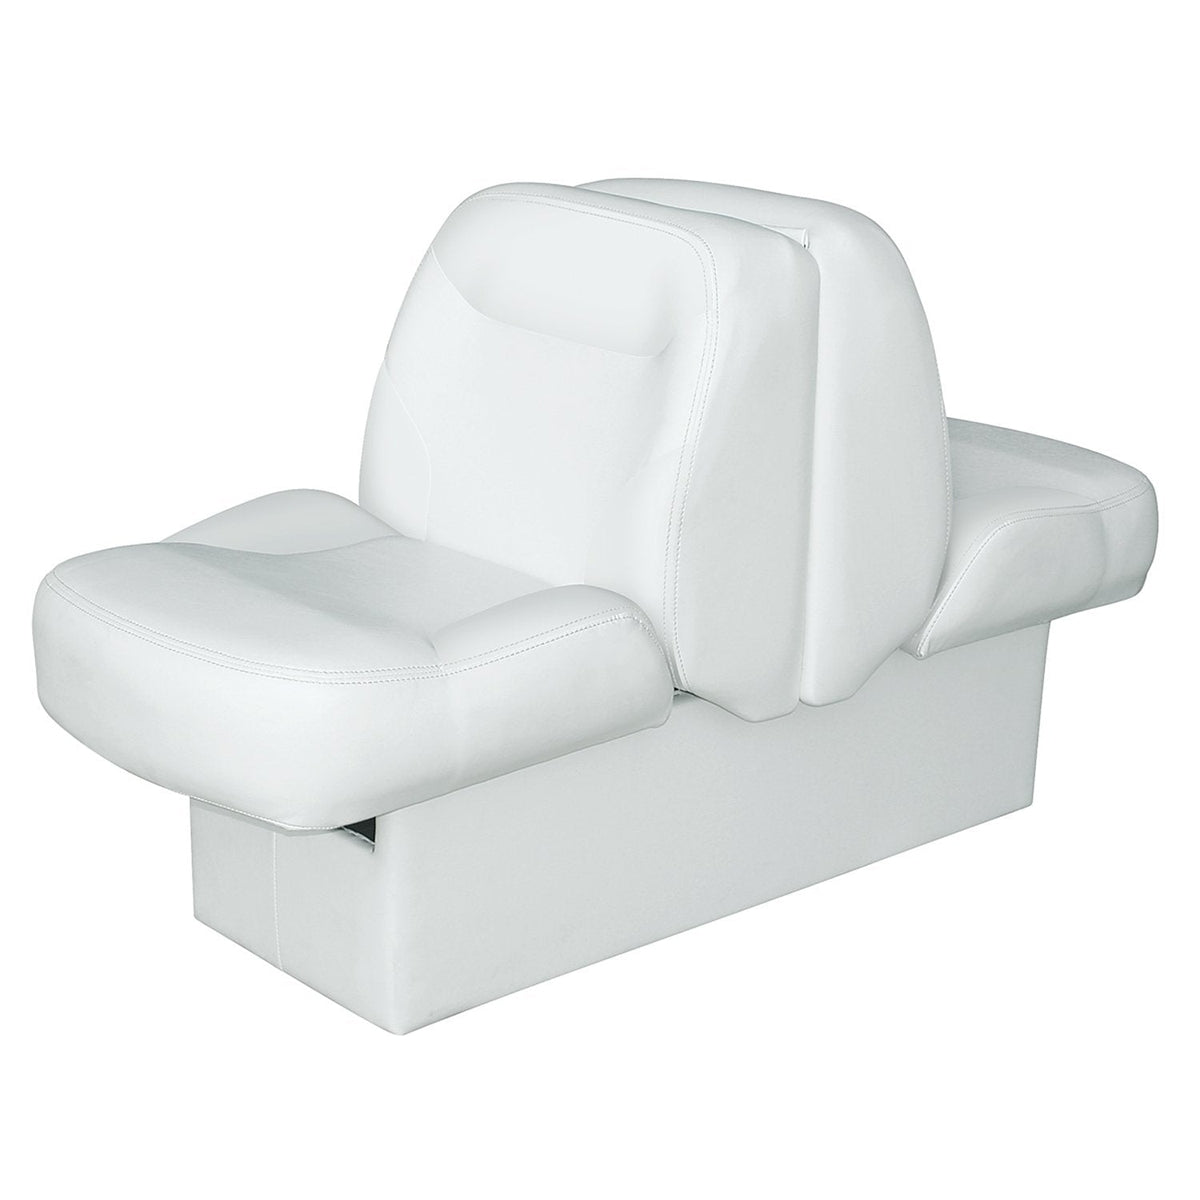 Wise Oversized - Not Qualified for Free Shipping Wise Capri/Classic B-to-B Seat White #8WD1225-0030